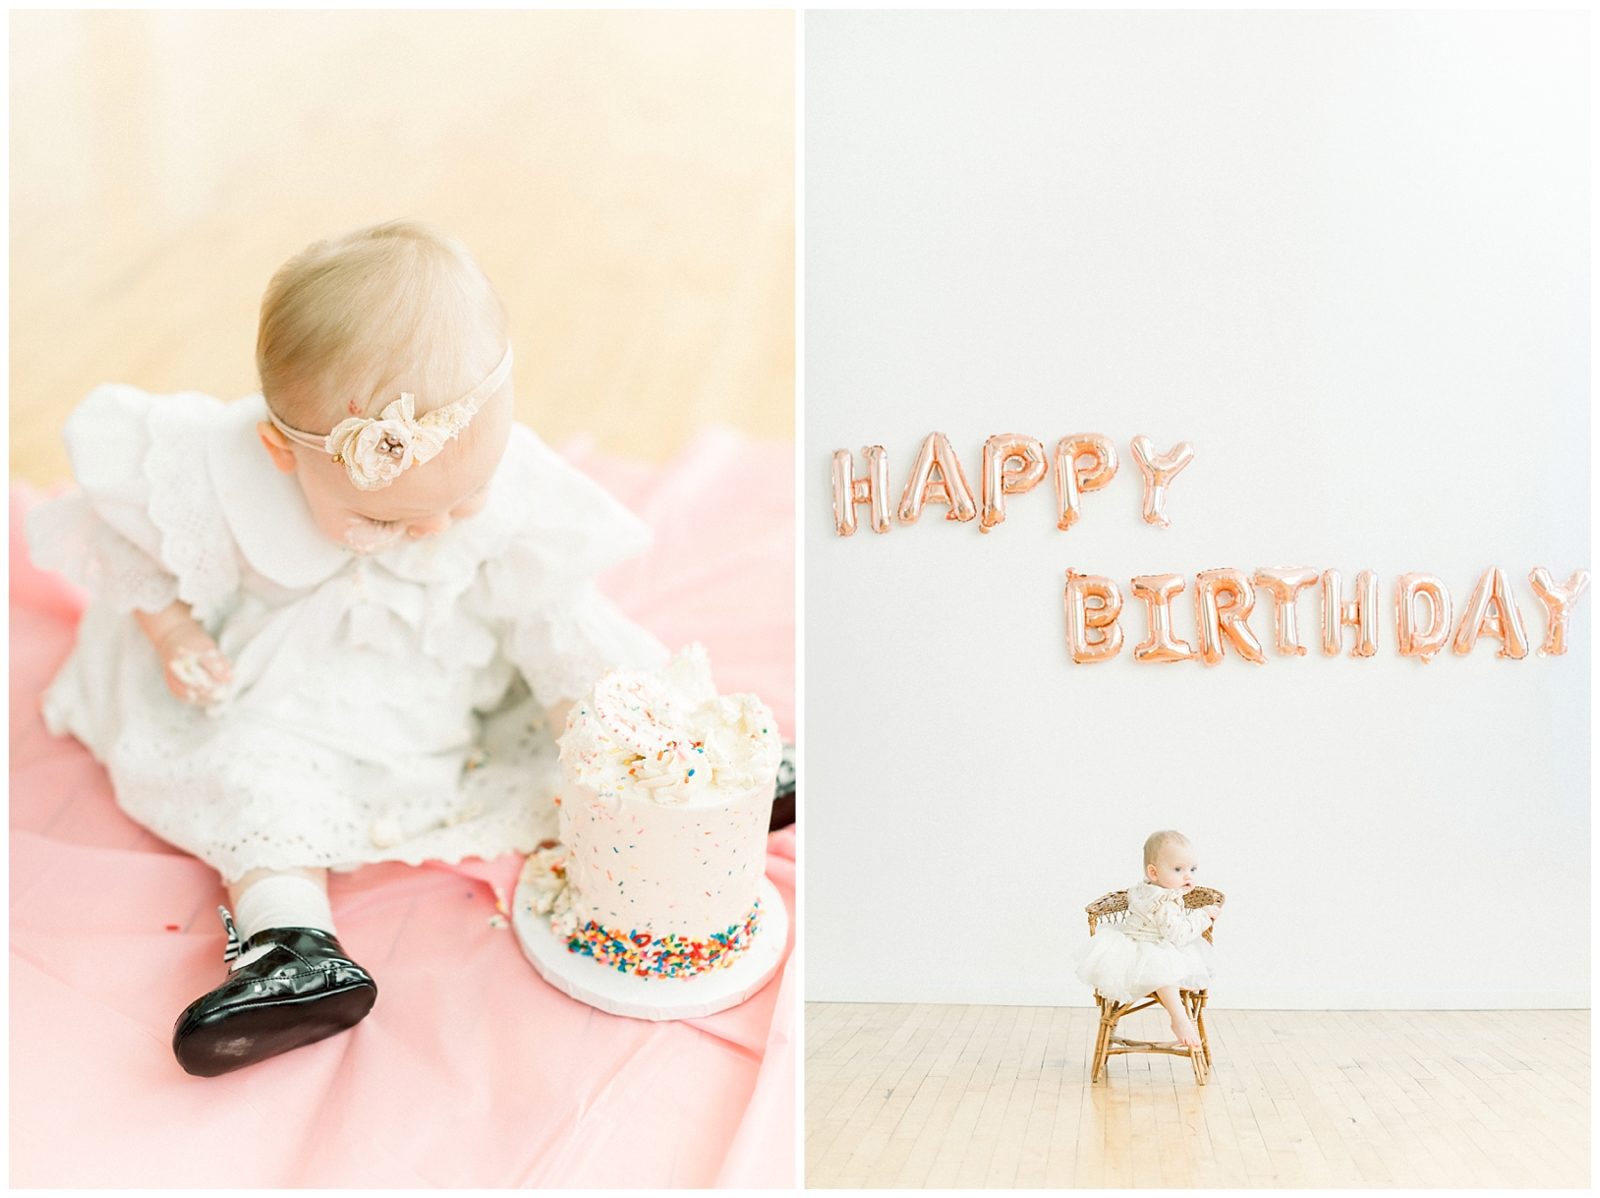 Light and airy birthday party